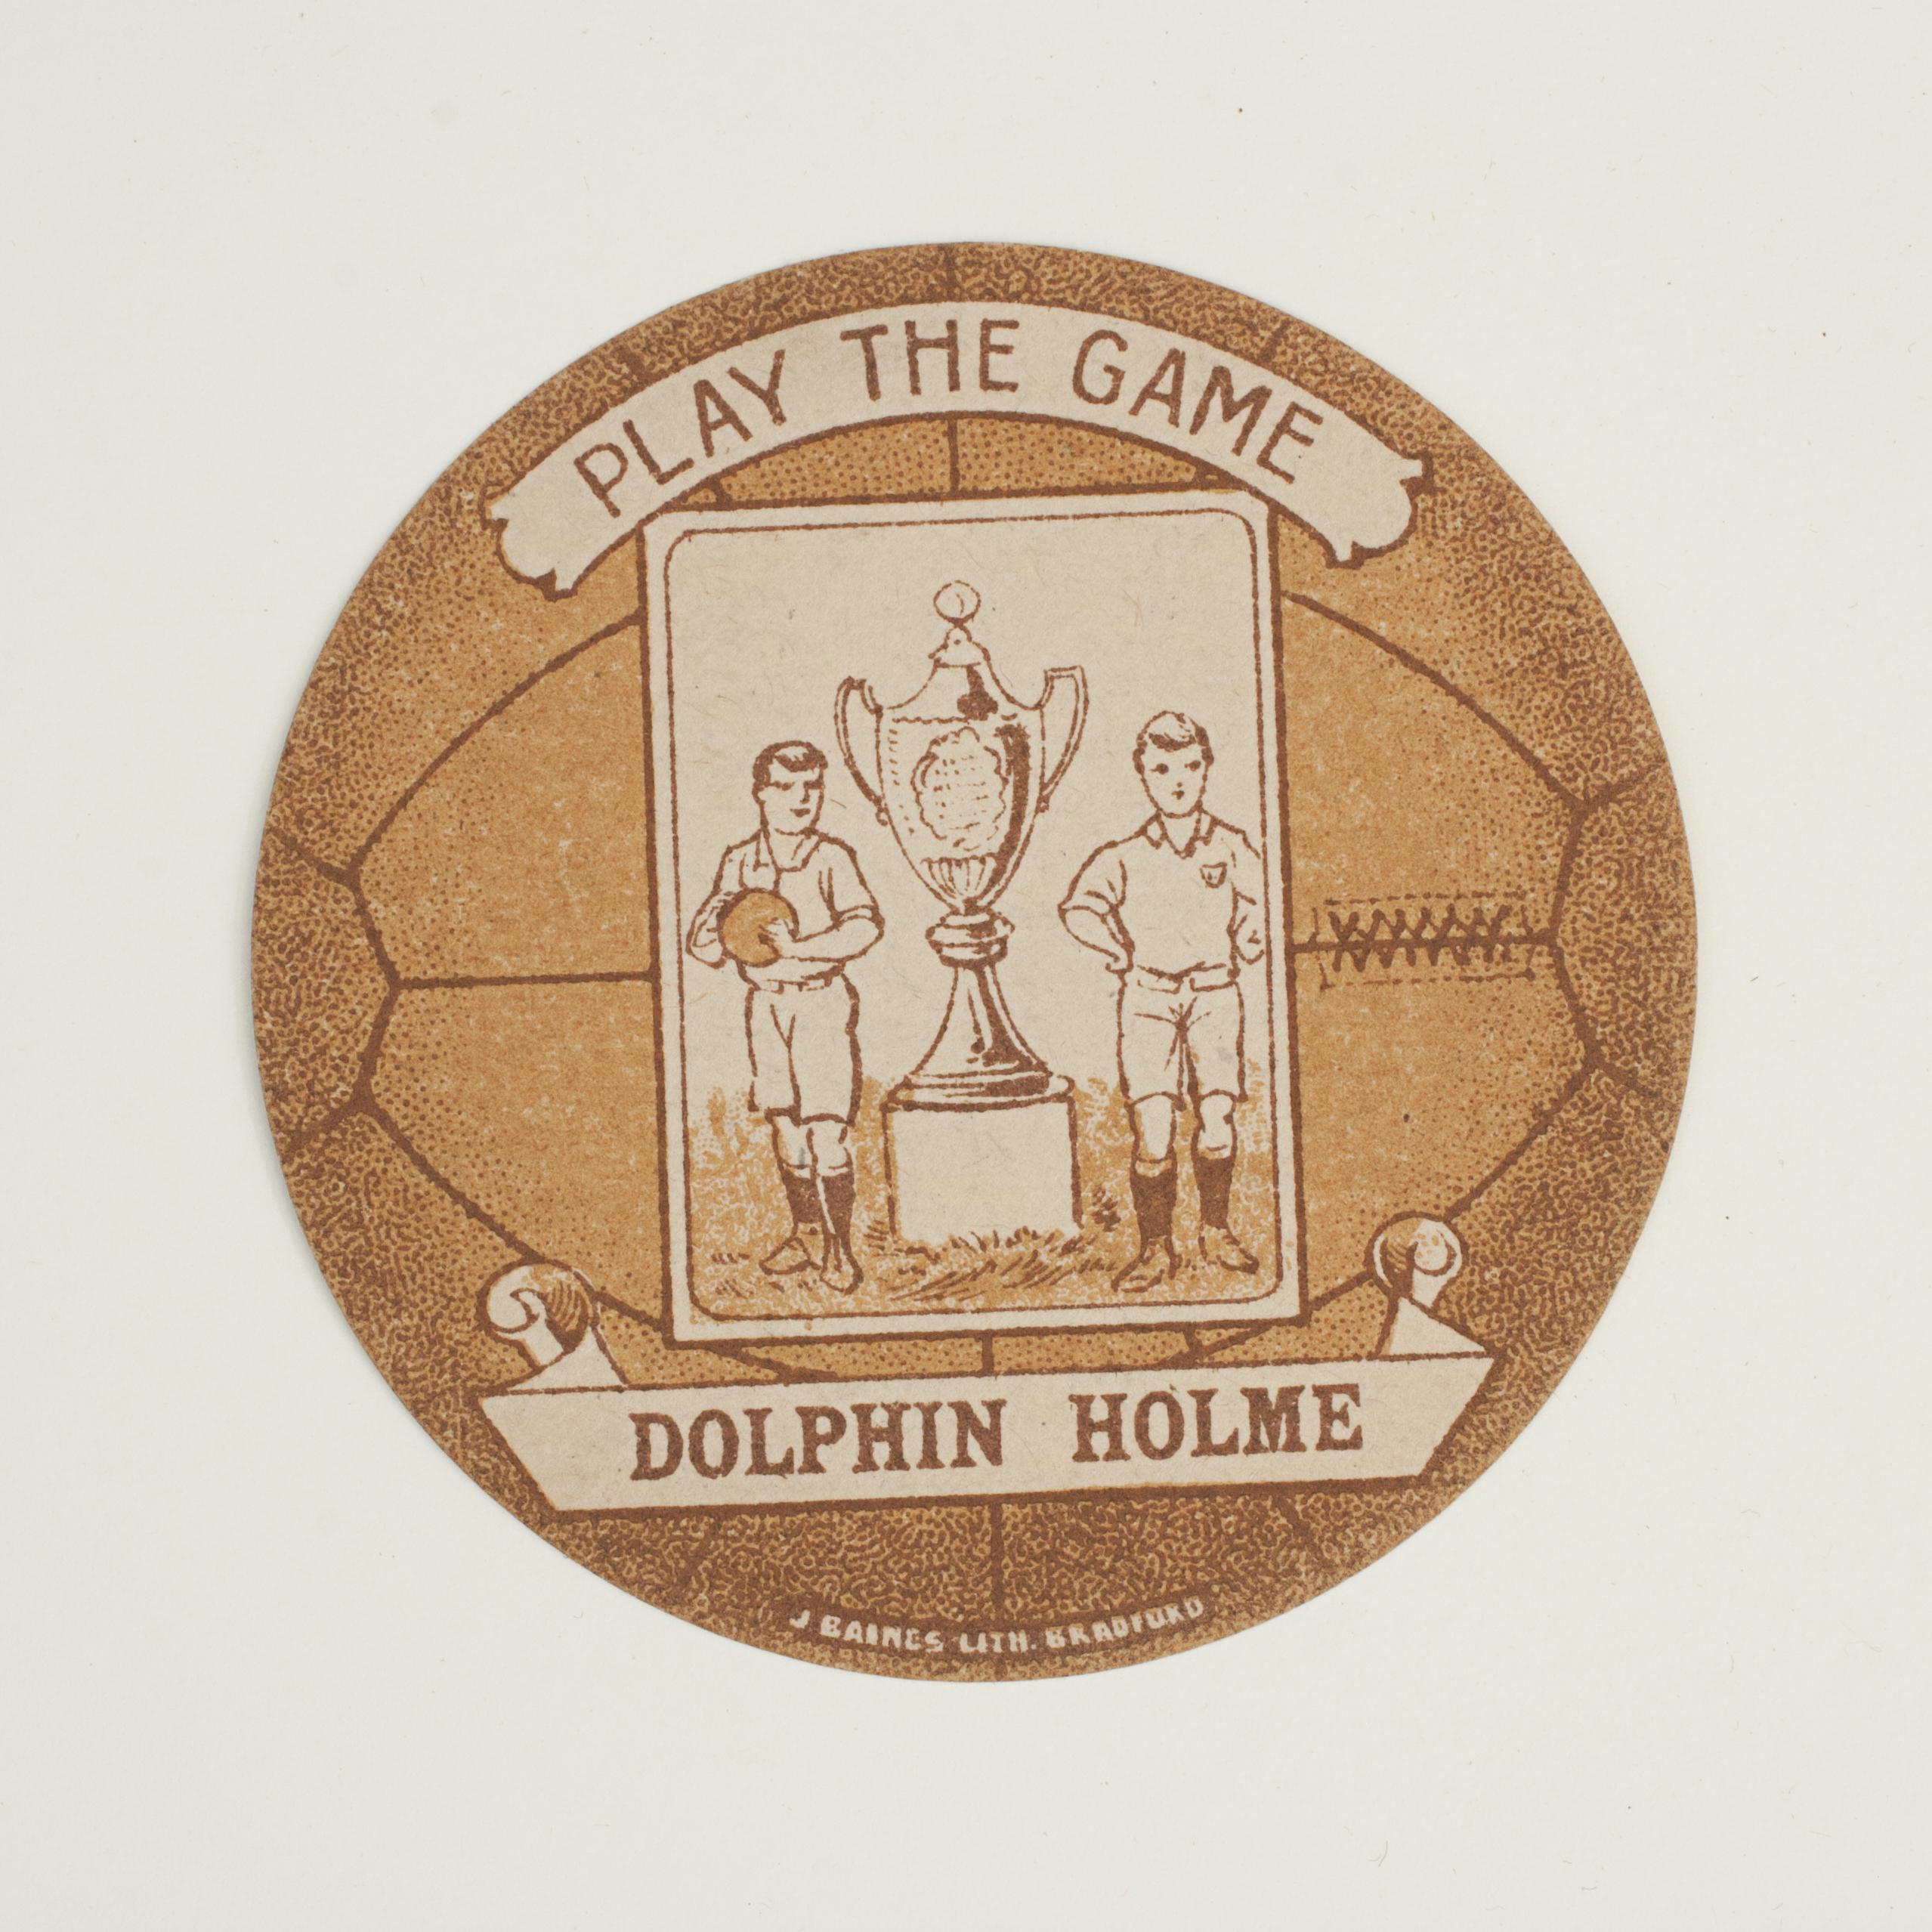 Sporting Art Baines Football Trade Card, Dolphin Holme, Play The Game For Sale